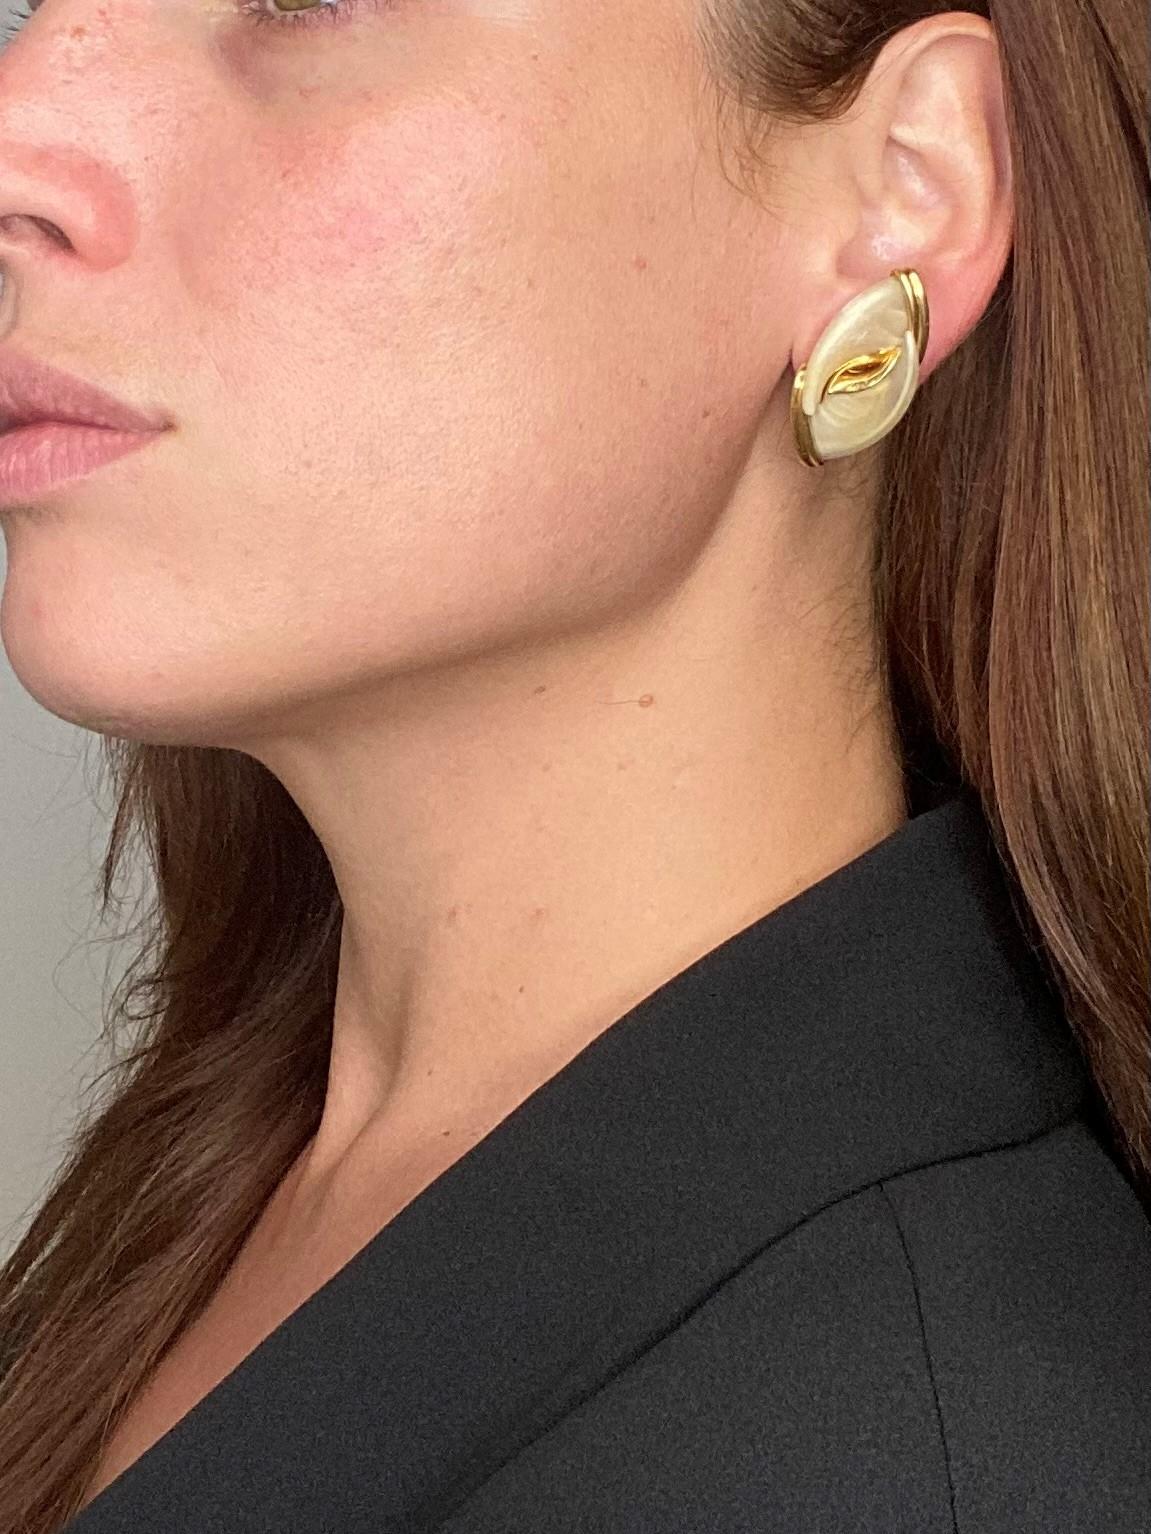 Pair of earrings designed by Bry & Co. of Paris.

An unusual and one-of-a-kind pair, made in Paris France in the 1970's. They was crafted Bry & Co. in solid yellow gold of18 karats, with the surfaces finished in high polish. Suited with French omega